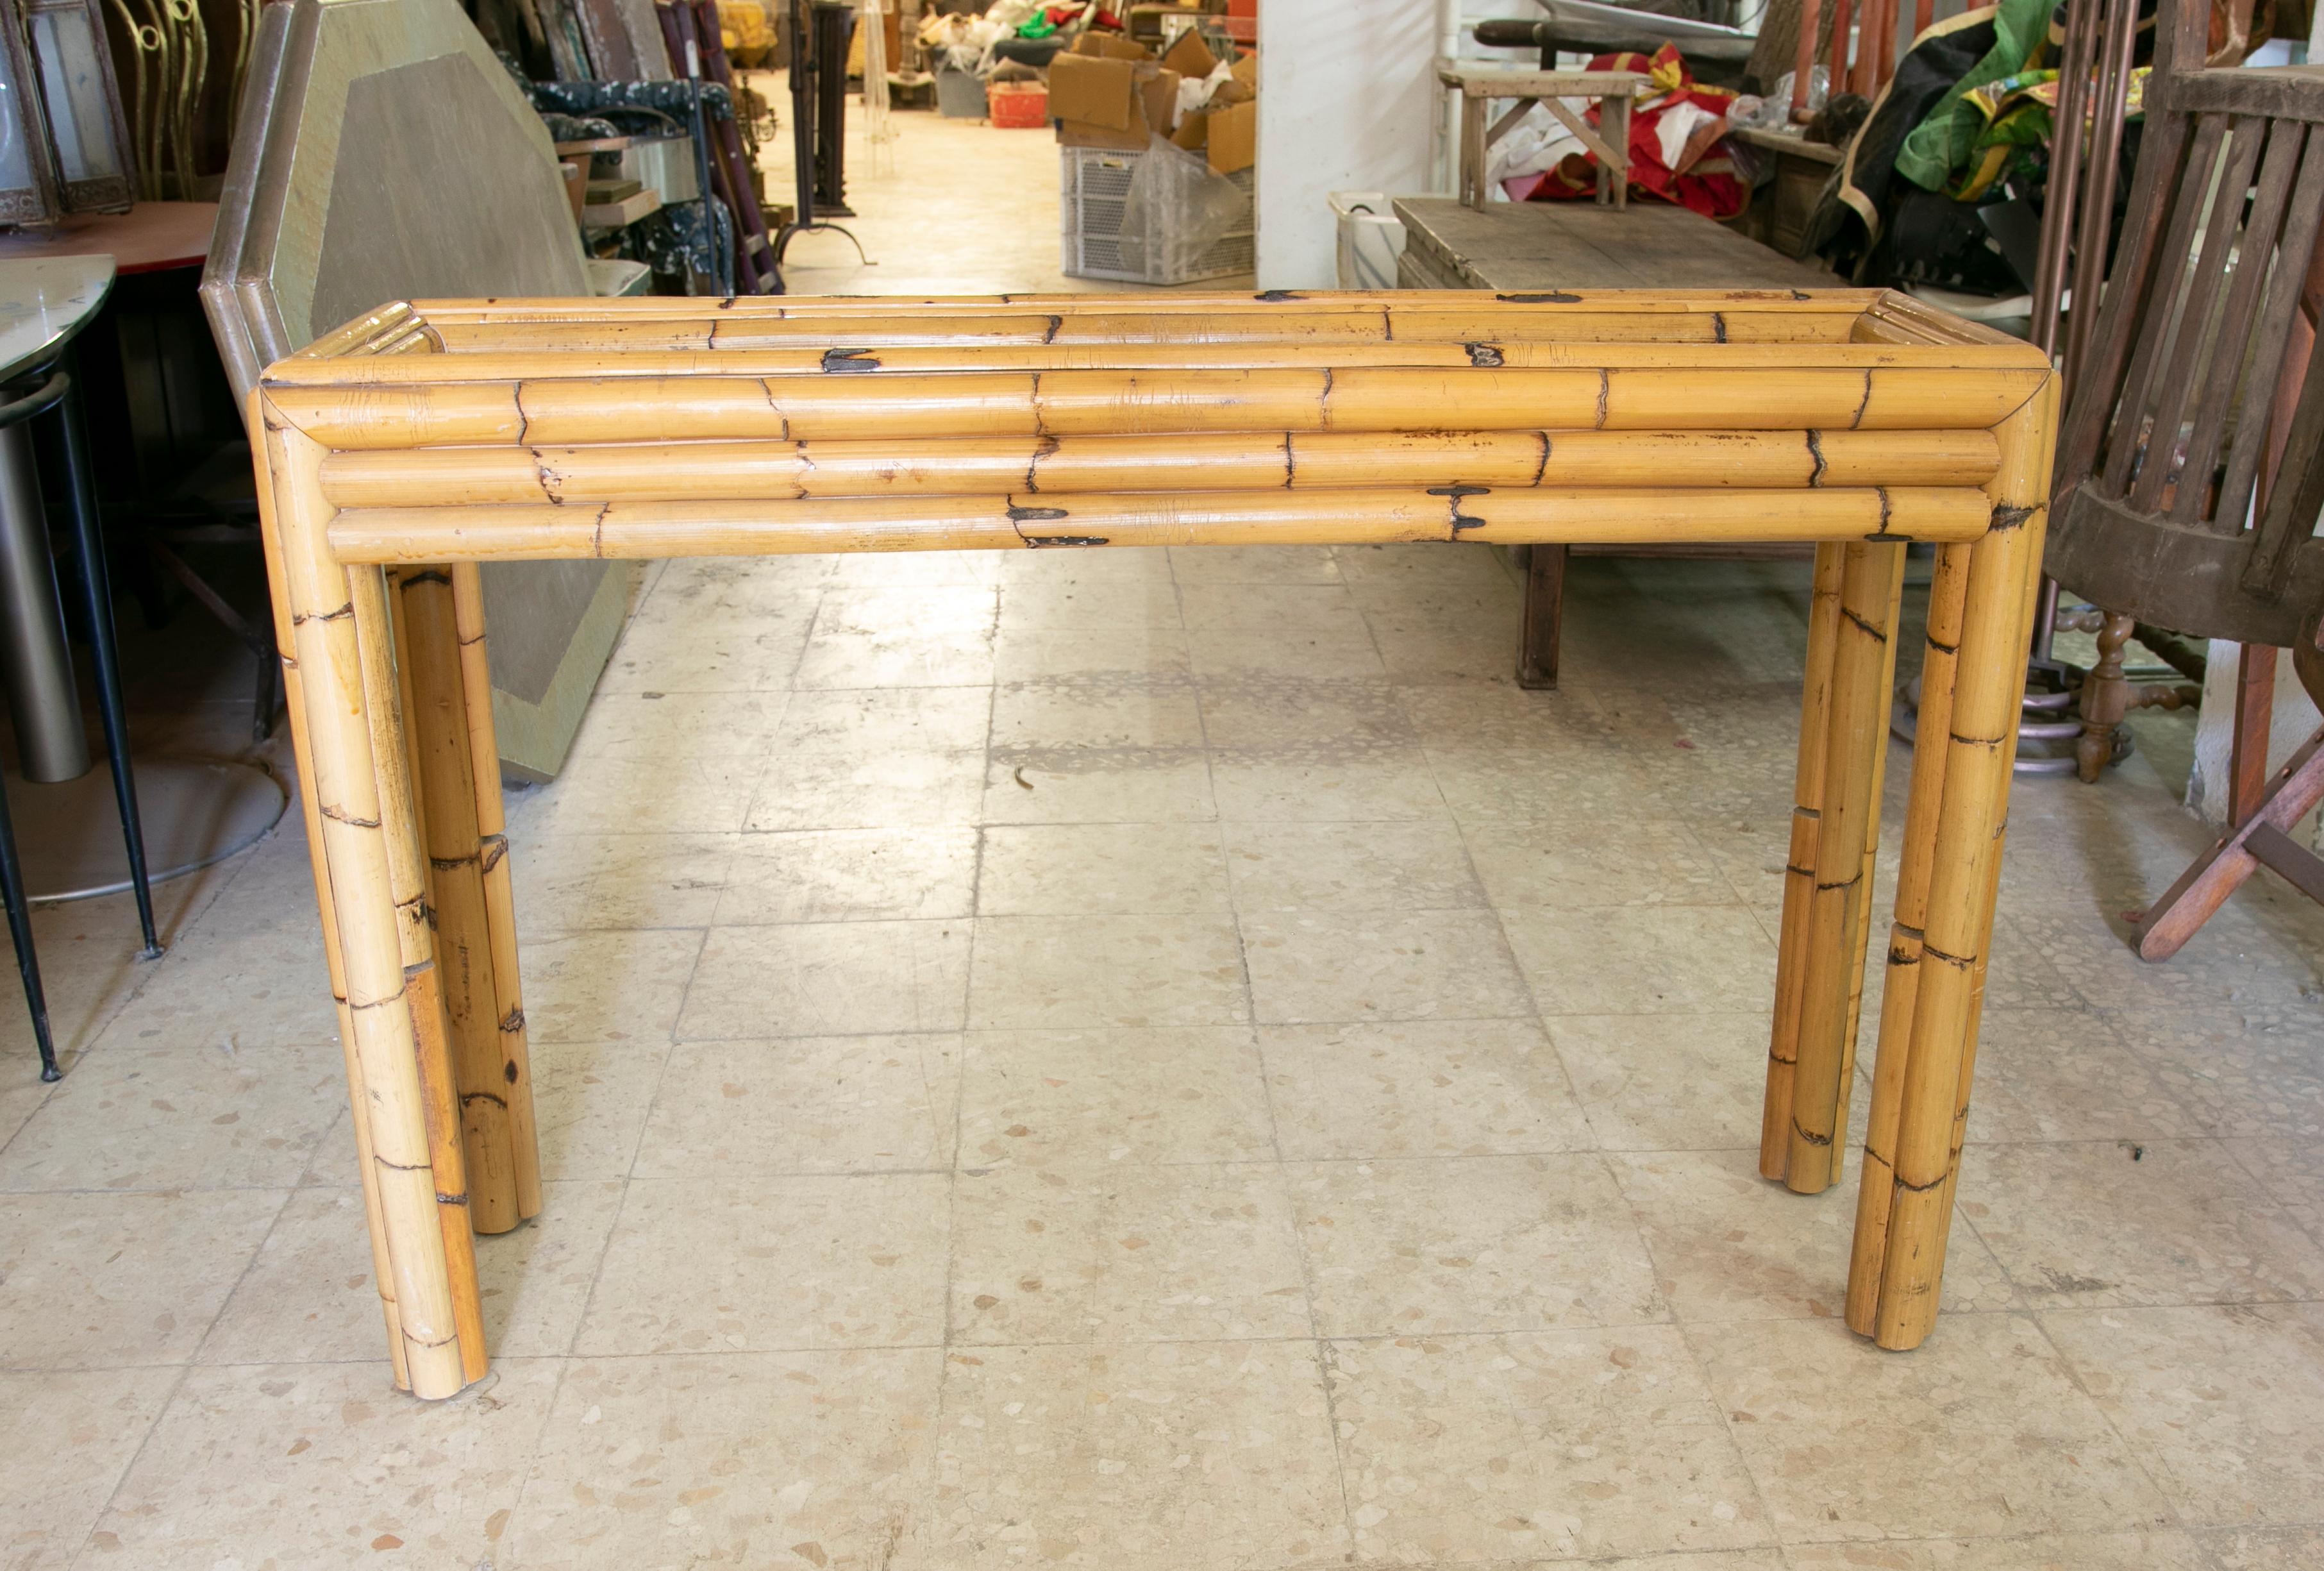 1970s Spanish bamboo console with a glass top (included in the price).
 